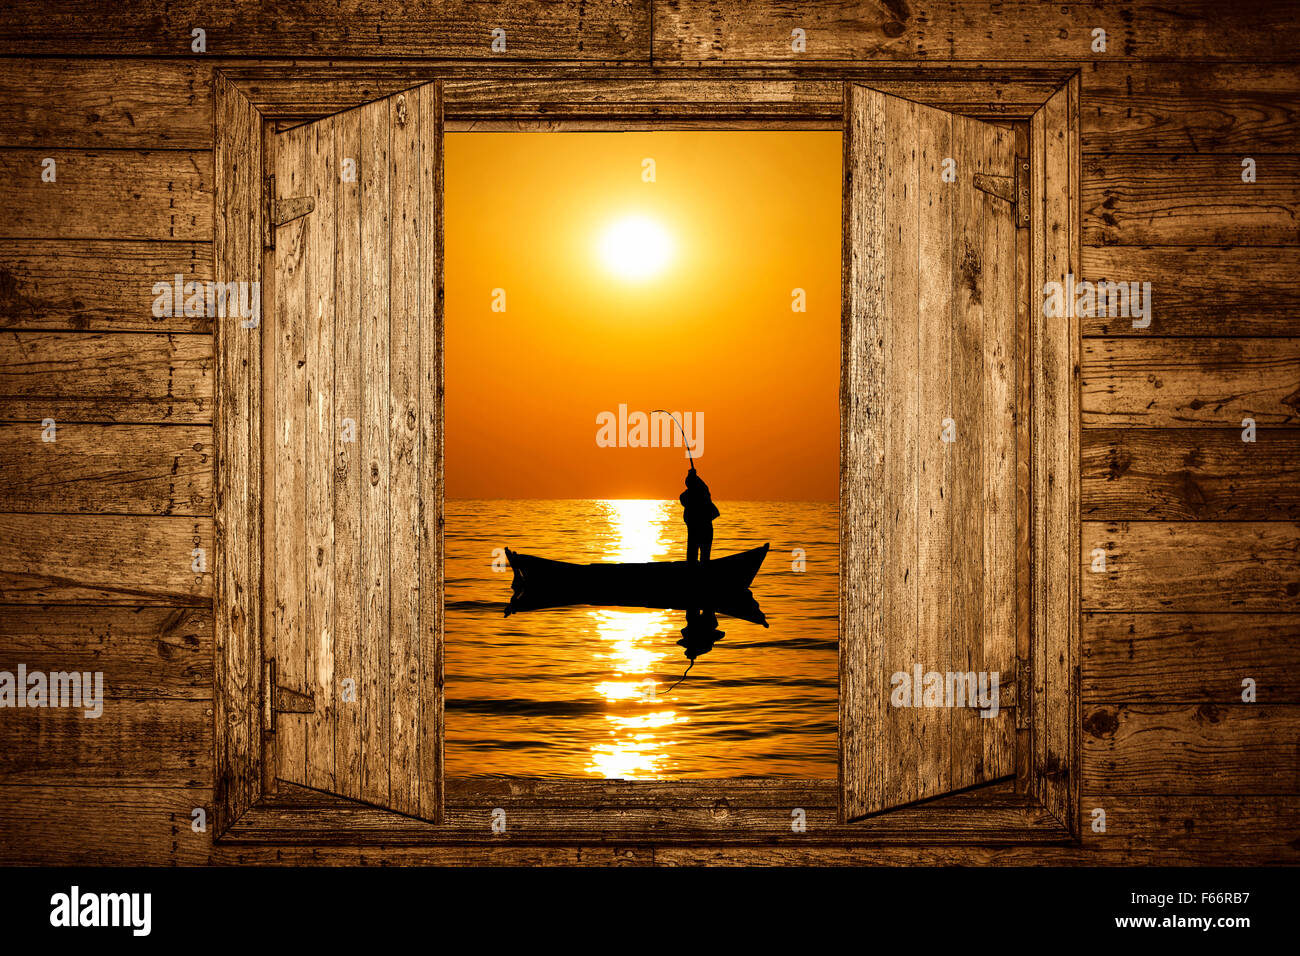 Wooden Frame and Fisherman Landscape Stock Photo